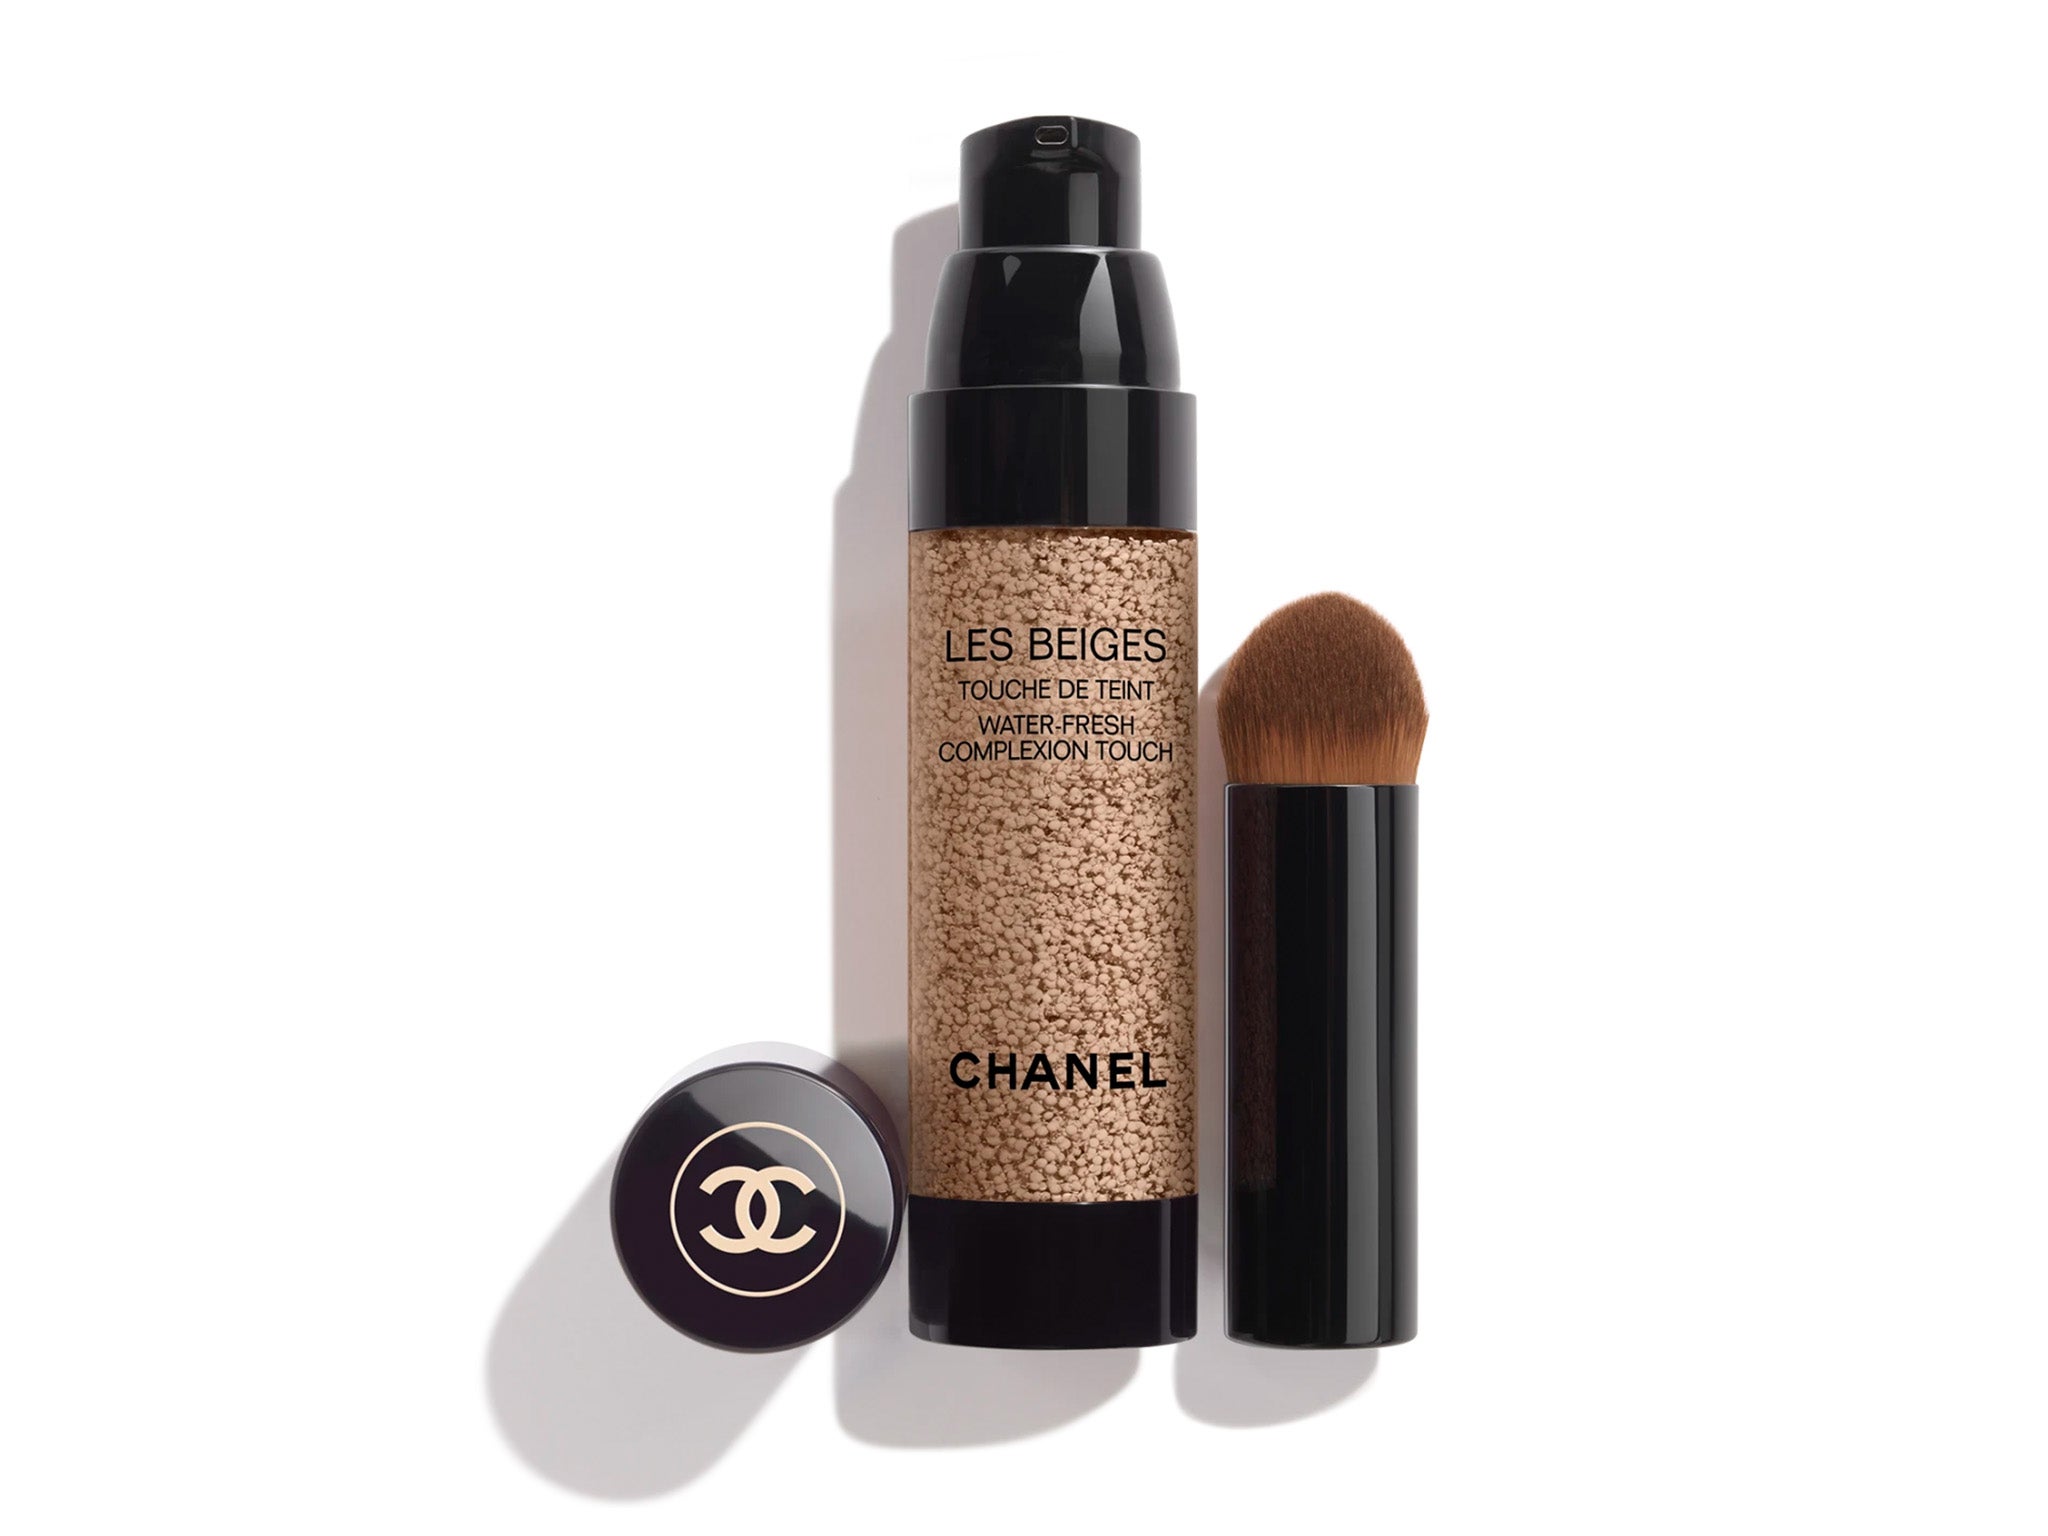 CHANEL LES BEIGES FOUNDATION Water Fresh Tint review 